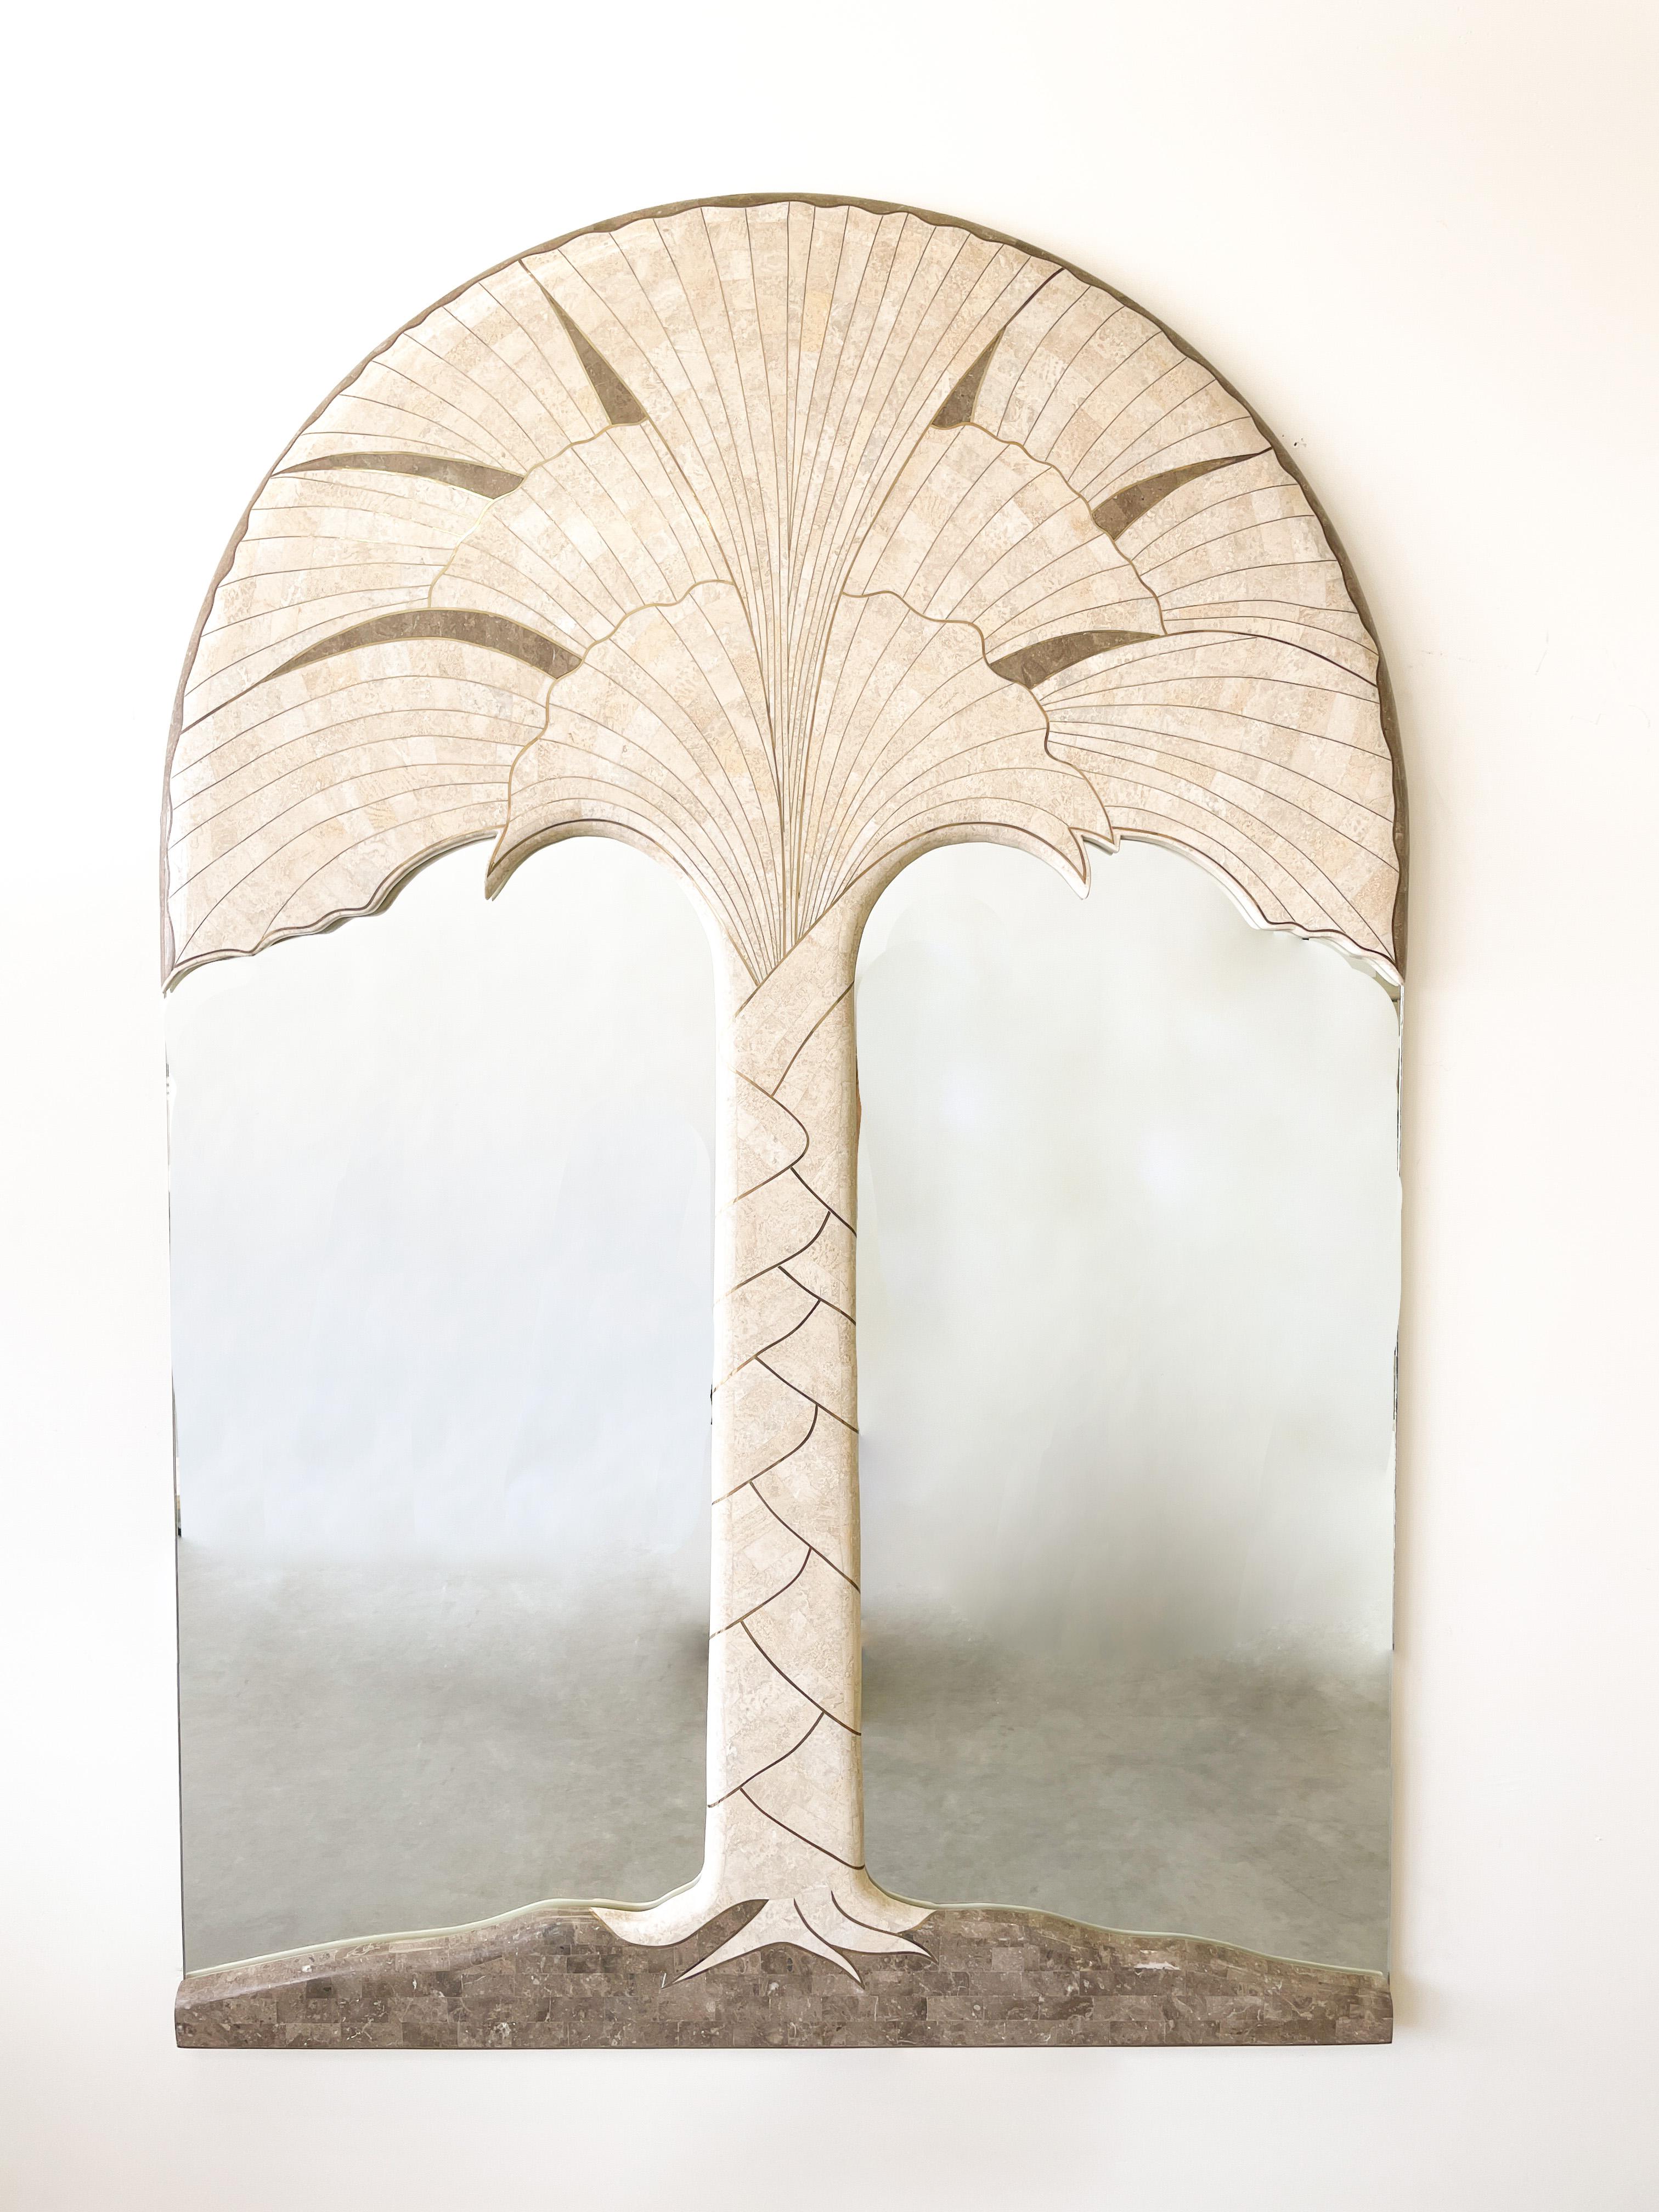 Vintage 80s, Tessellated Marble Stone Palm Tree With Brass Inlay Mirror.

The mirror is tessellated marble with brass inlay.
Very heavy and made very well.

Frame Color: Natural light cream & brass

Measurements:
Width: 48 1/4